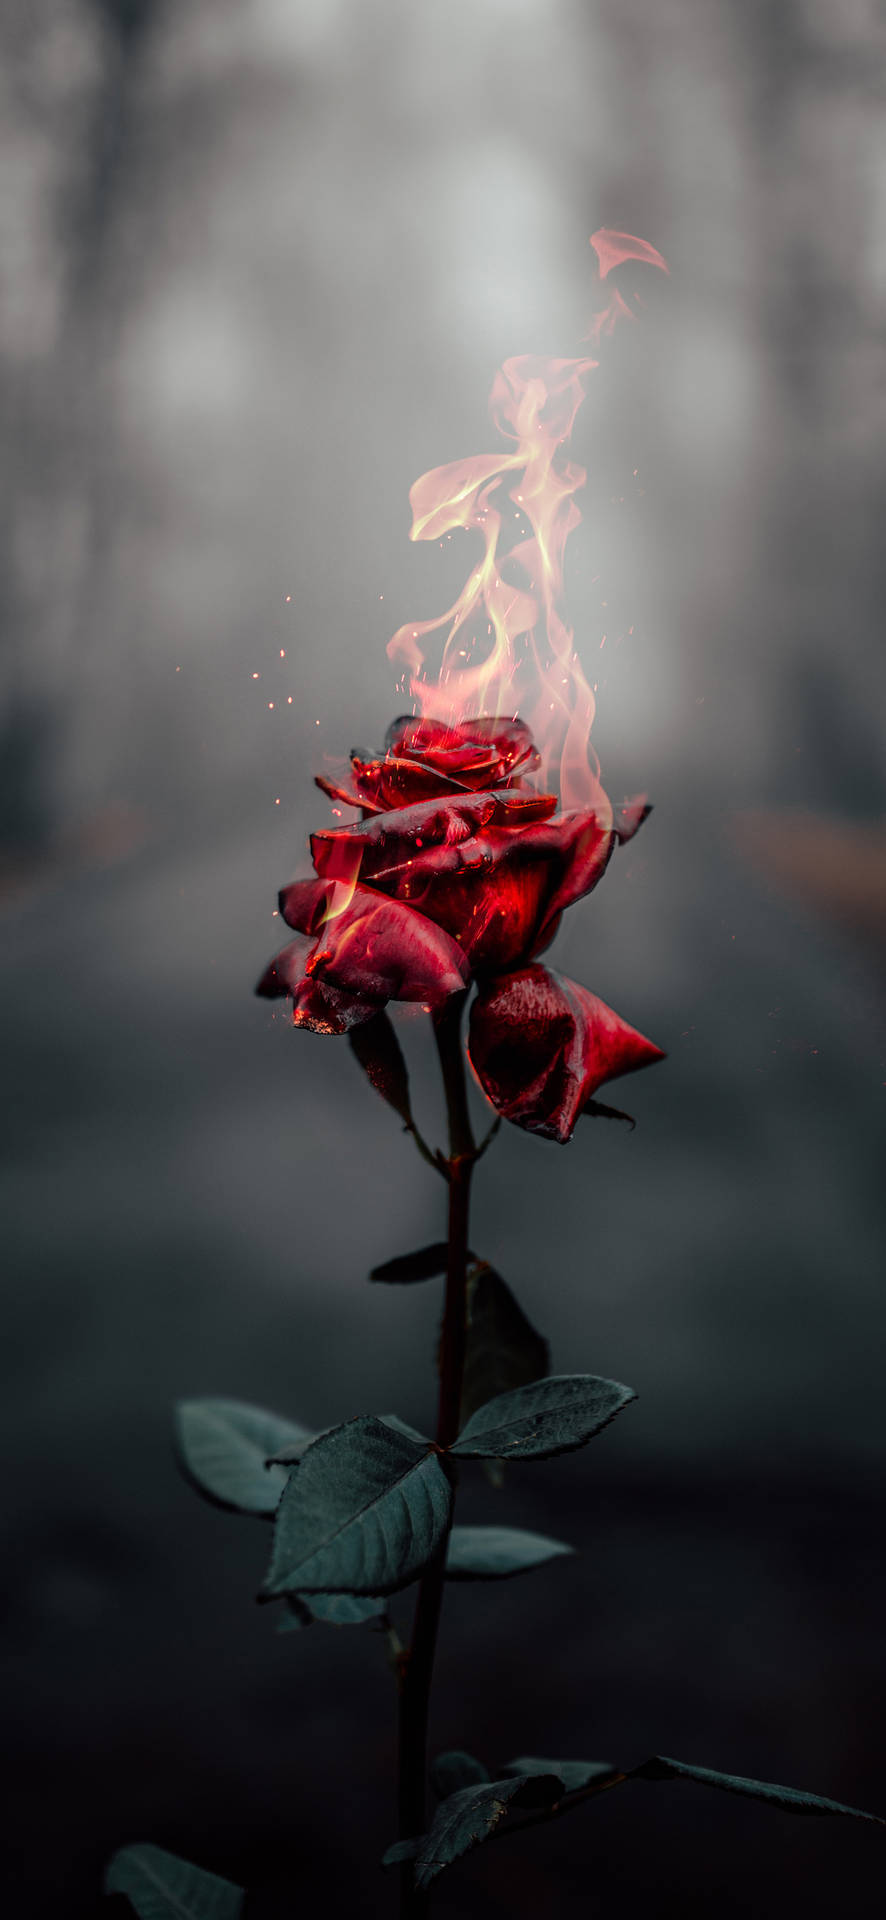 Iphone Aesthetic Flaming Rose Background